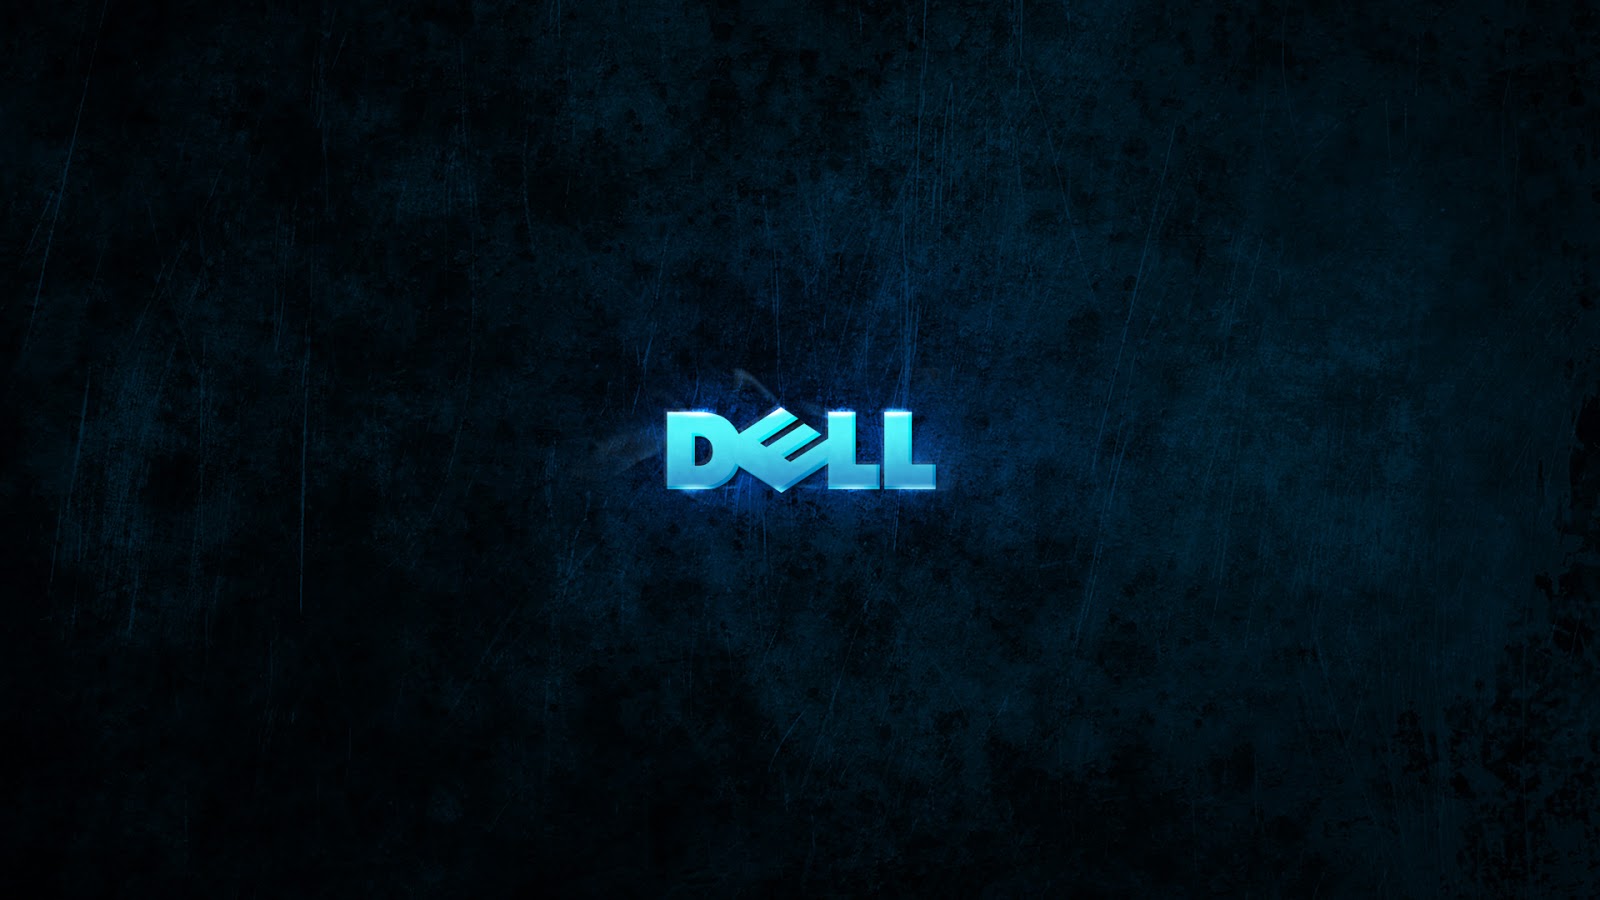 HD Dell Backgrounds Dell Wallpaper Images For Windows 1600x900